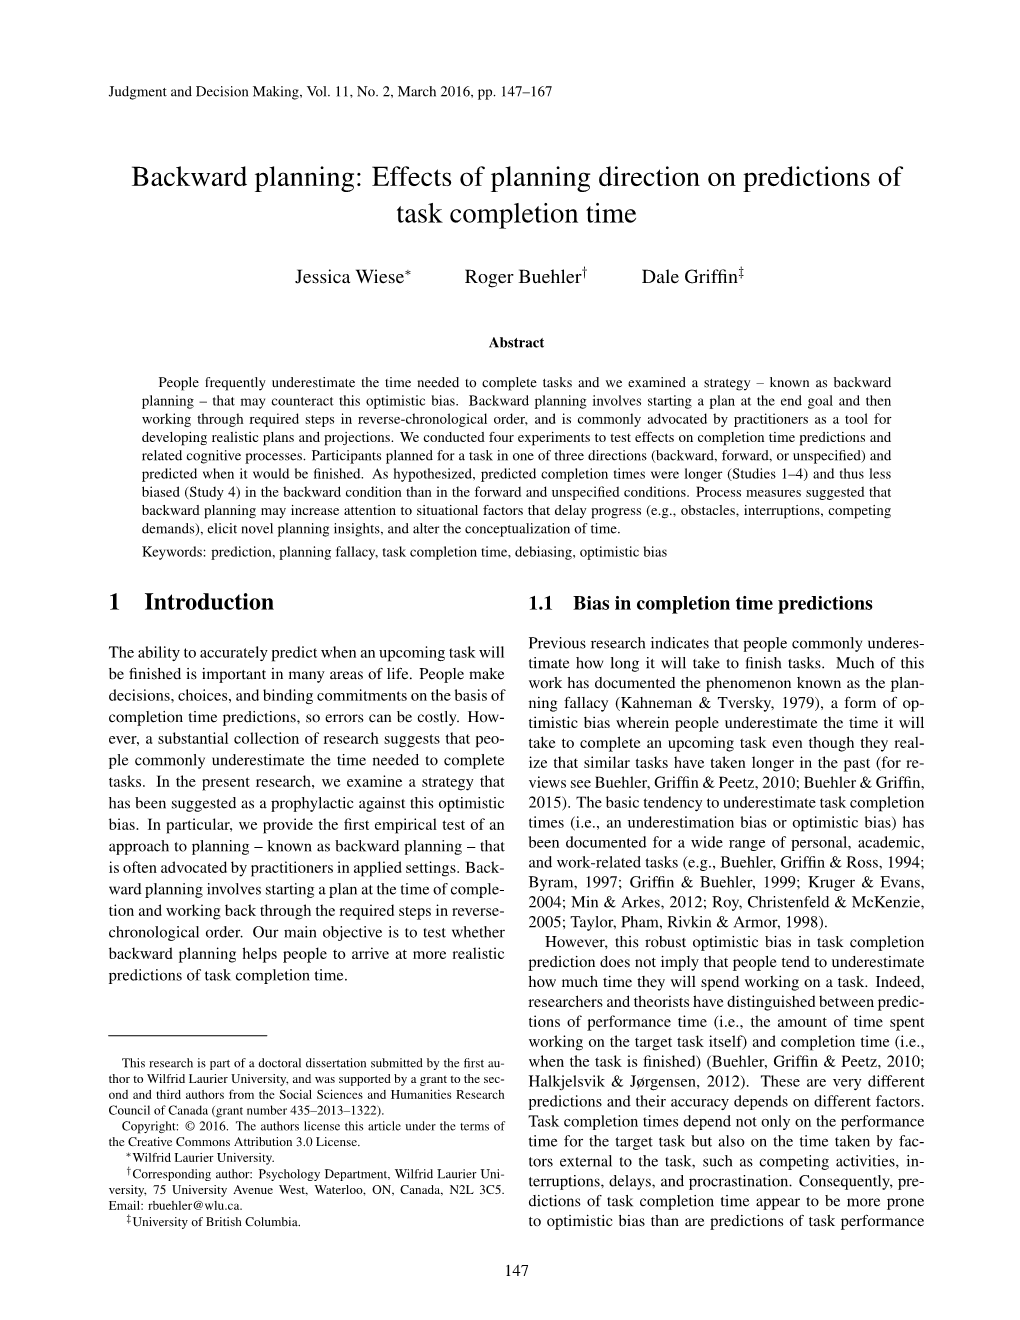 Backward Planning: Effects of Planning Direction on Predictions of Task Completion Time